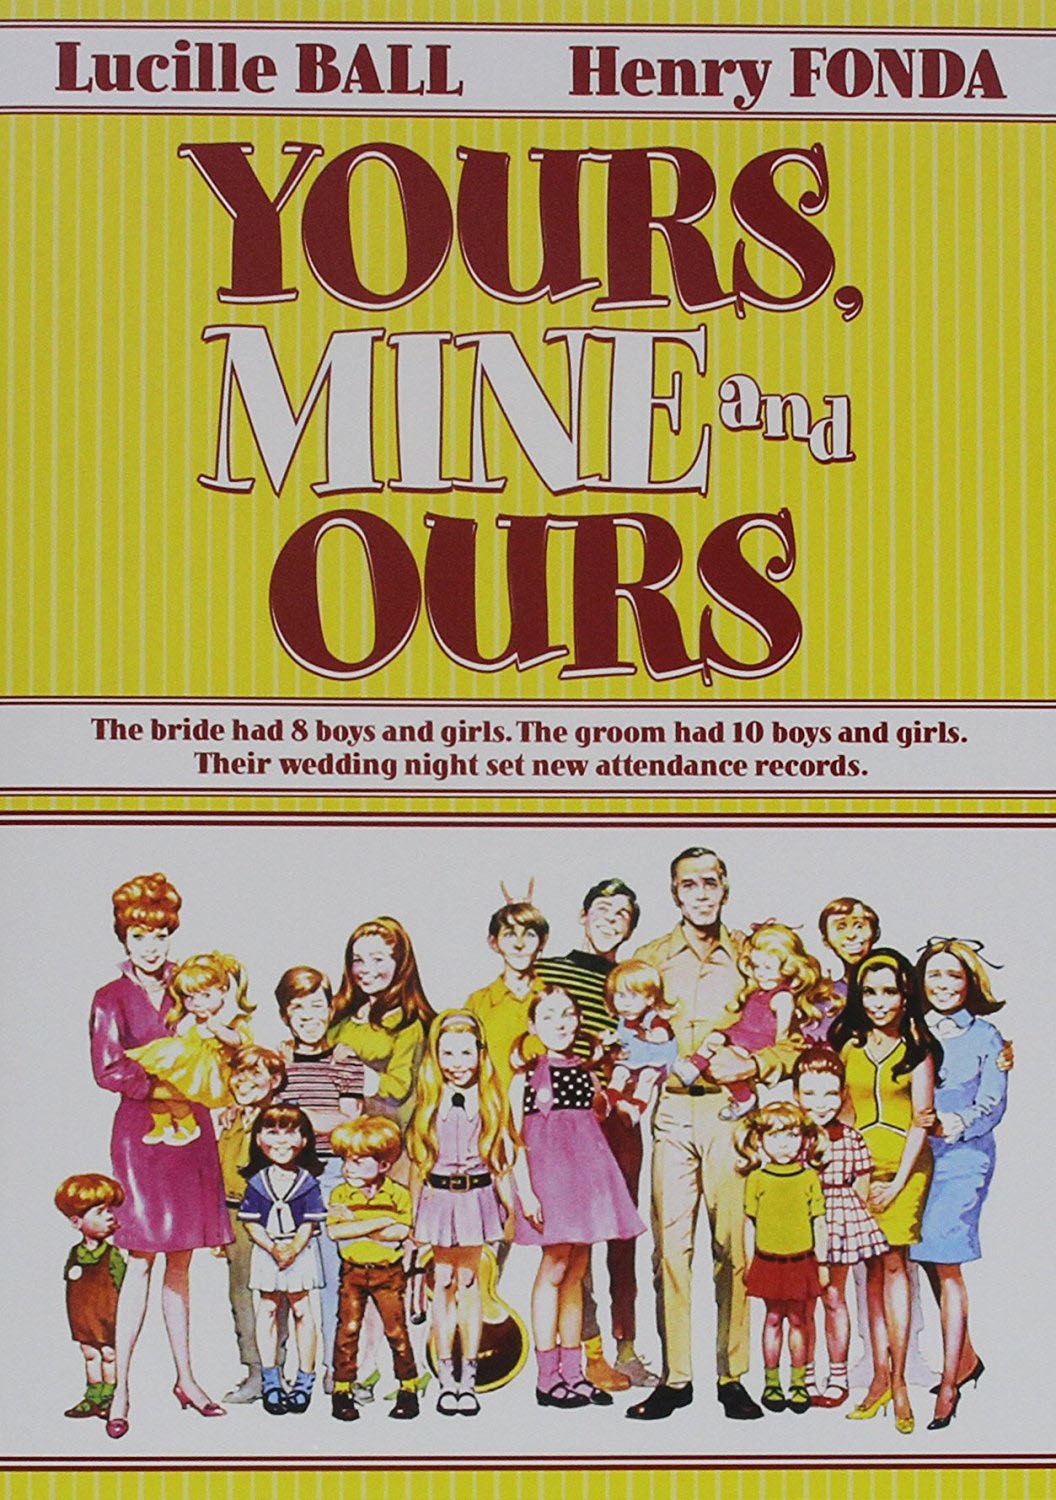 and　Best　[1968]　Ours　Mine　Yours,　Buy